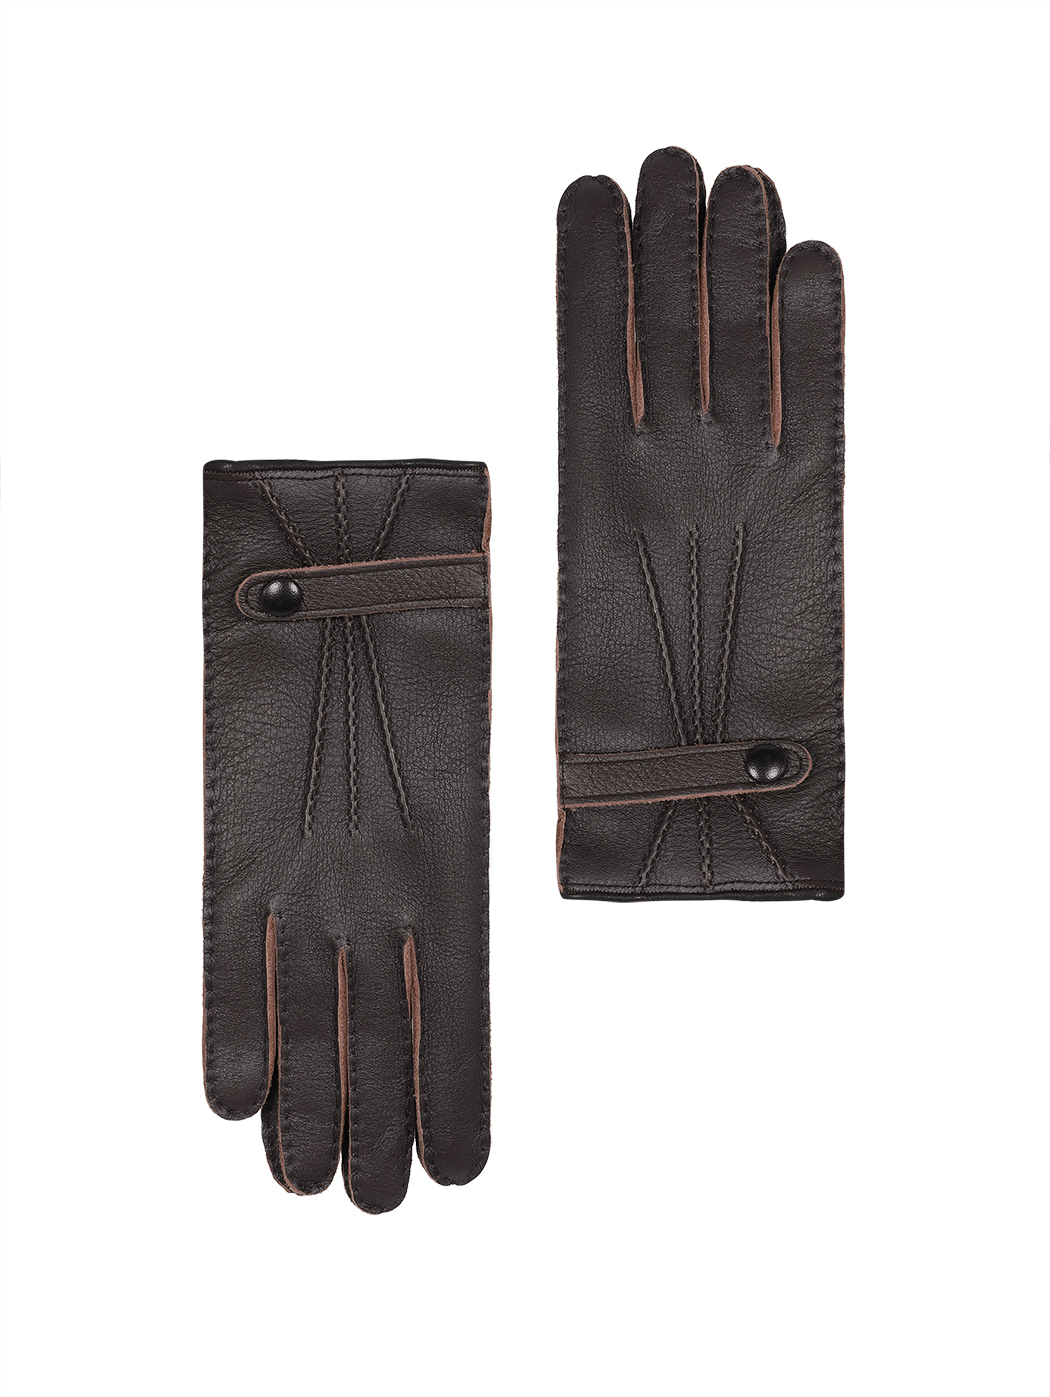 Women's two-tone leather gloves